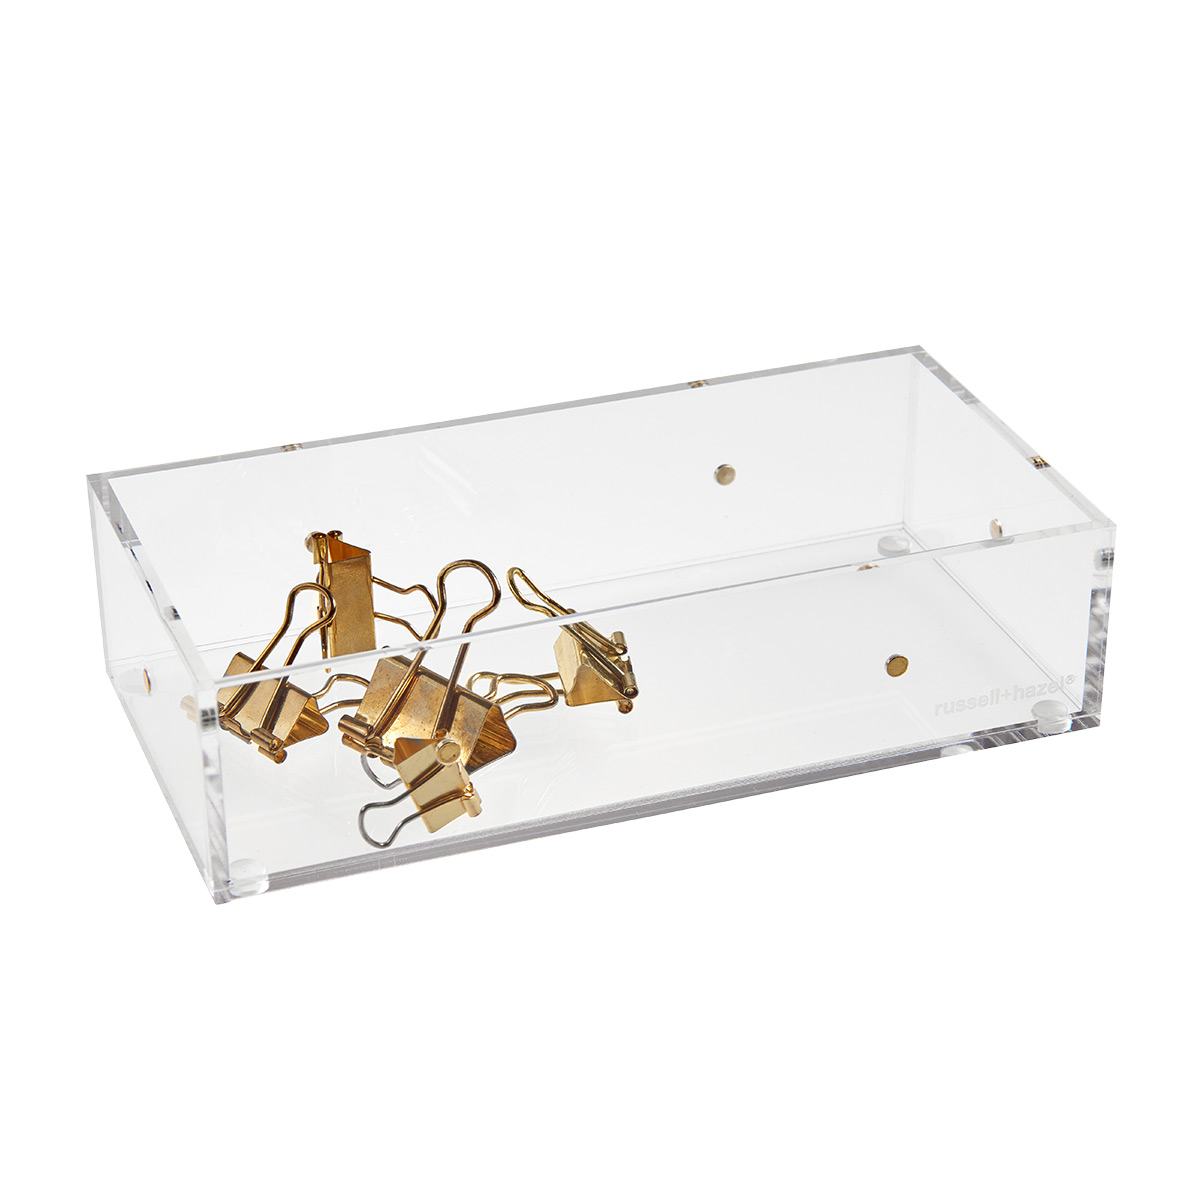 https://www.containerstore.com/catalogimages/477542/10092896-rh-acrylic-drawer-organizer.jpg